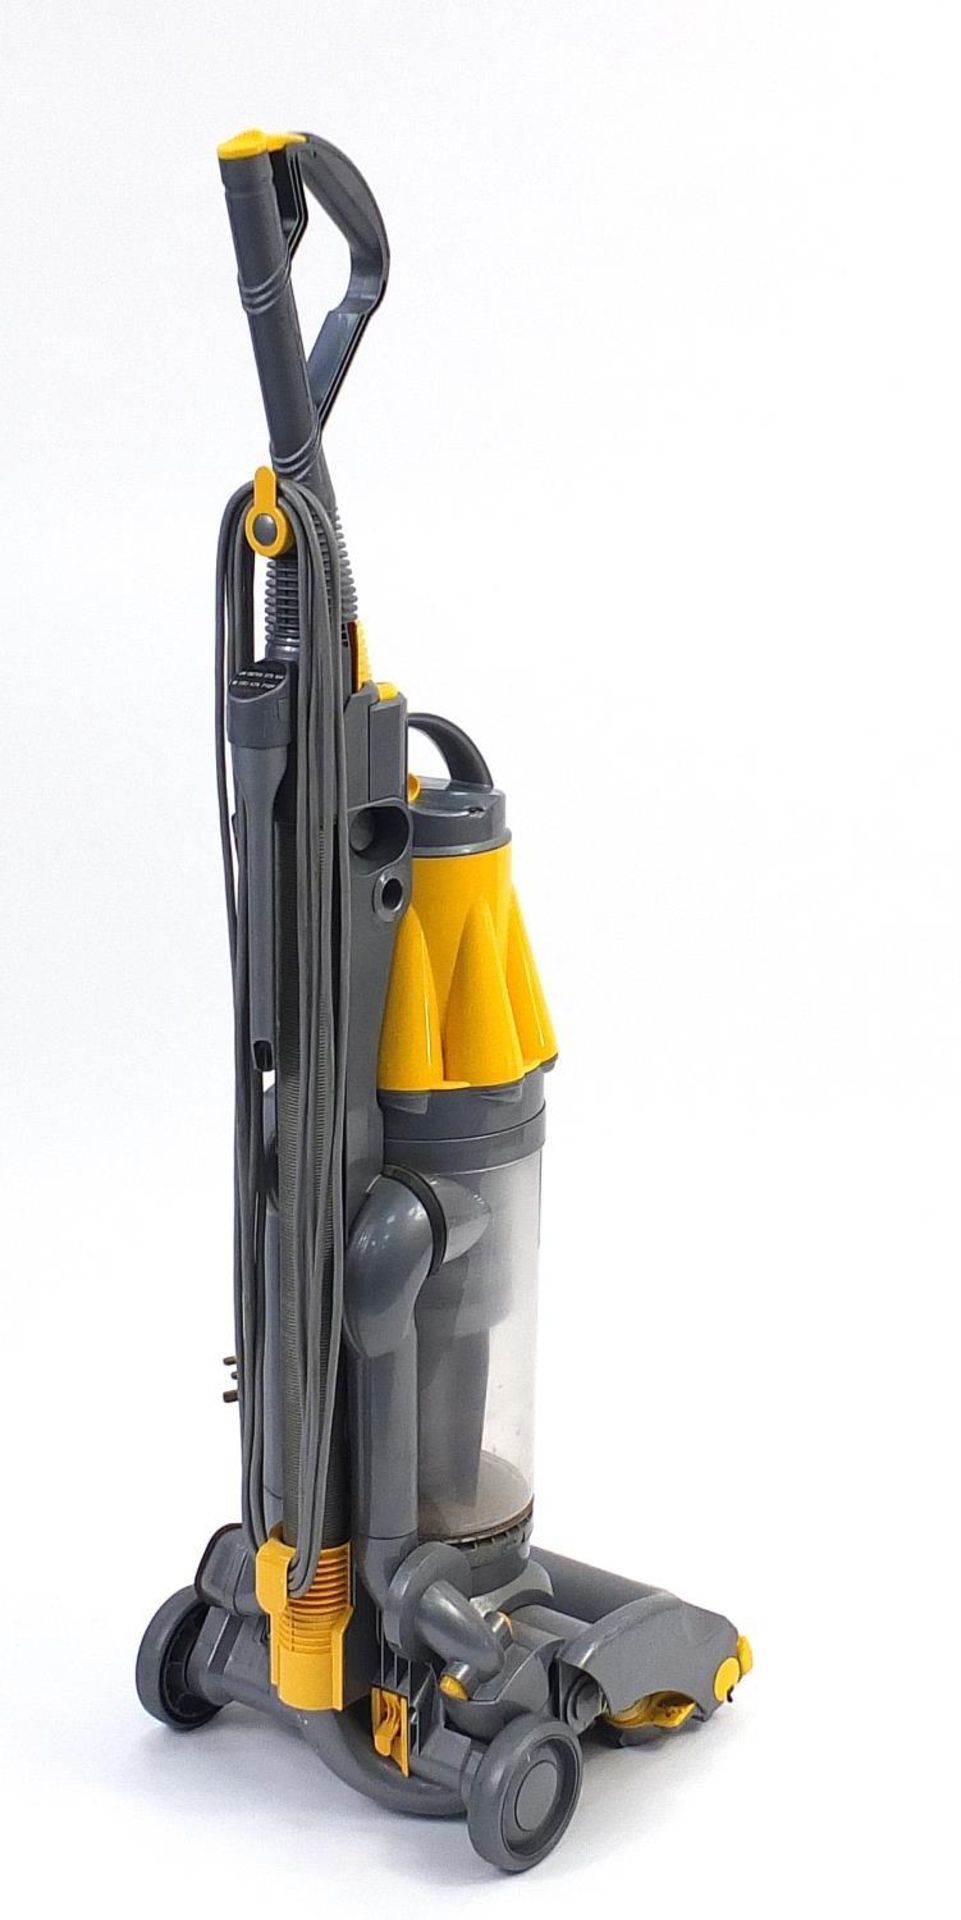 Dyson DC07 upright vacuum cleaner - Image 3 of 3